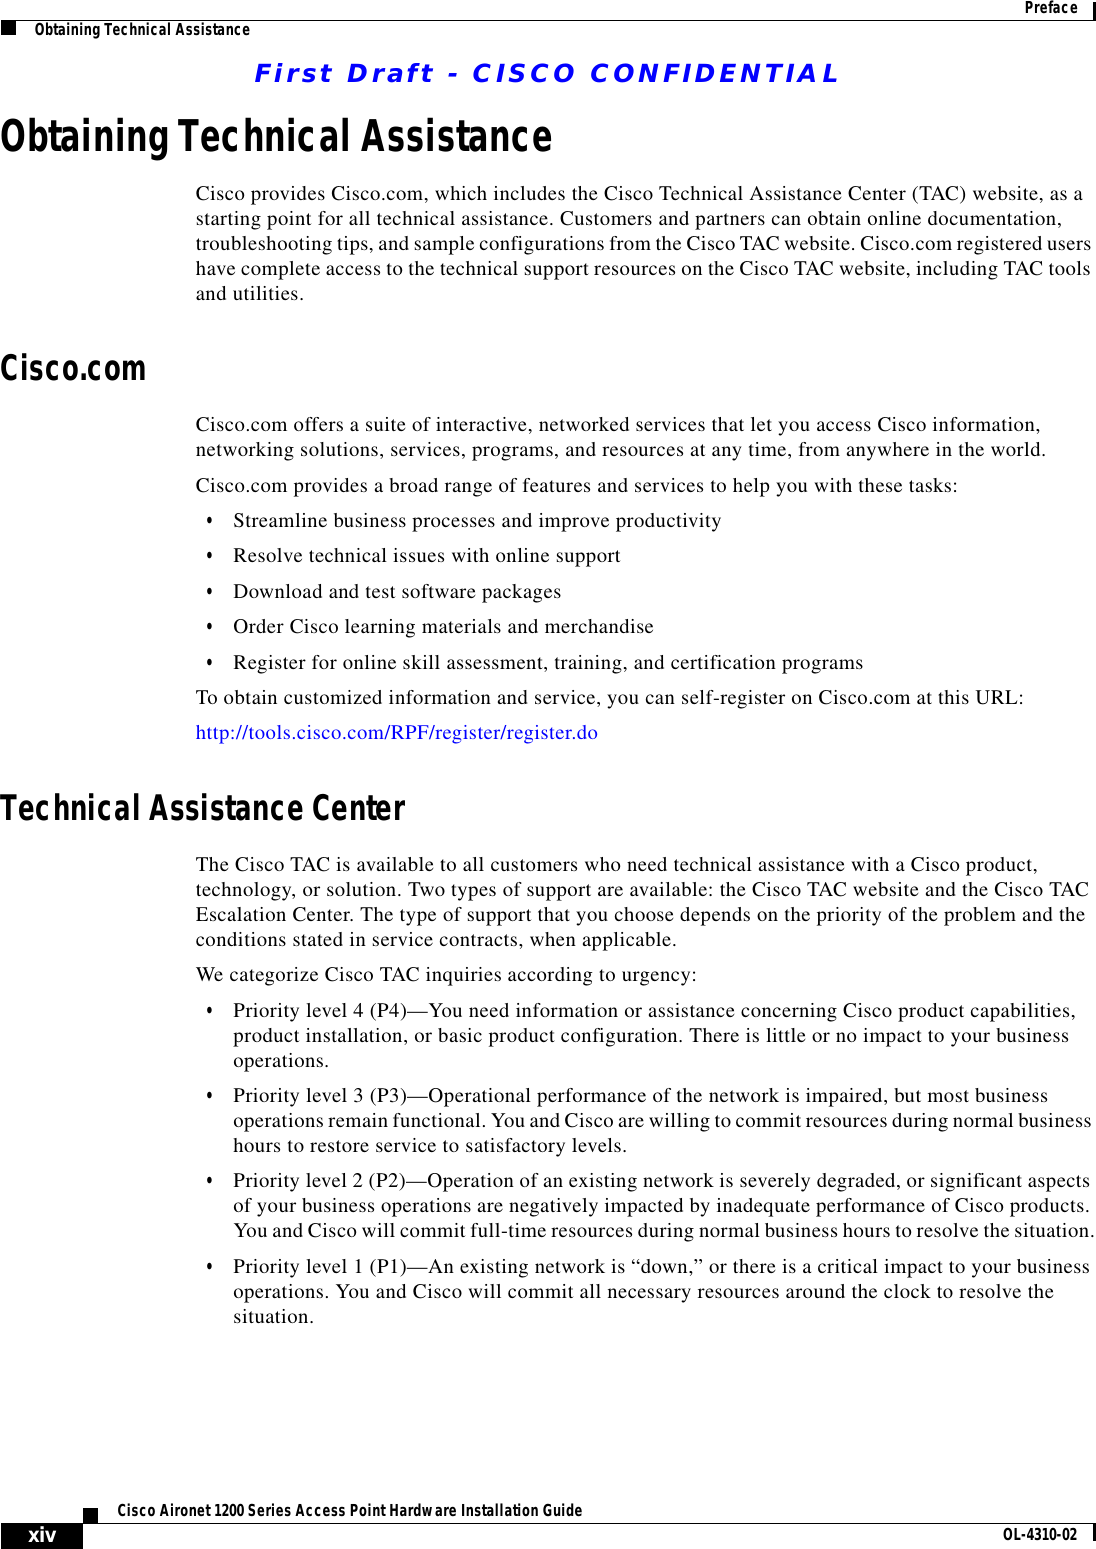 First Draft - CISCO CONFIDENTIALxivCisco Aironet 1200 Series Access Point Hardware Installation Guide OL-4310-02PrefaceObtaining Technical AssistanceObtaining Technical AssistanceCisco provides Cisco.com, which includes the Cisco Technical Assistance Center (TAC) website, as a starting point for all technical assistance. Customers and partners can obtain online documentation, troubleshooting tips, and sample configurations from the Cisco TAC website. Cisco.com registered users have complete access to the technical support resources on the Cisco TAC website, including TAC tools and utilities. Cisco.comCisco.com offers a suite of interactive, networked services that let you access Cisco information, networking solutions, services, programs, and resources at any time, from anywhere in the world. Cisco.com provides a broad range of features and services to help you with these tasks:•Streamline business processes and improve productivity •Resolve technical issues with online support•Download and test software packages•Order Cisco learning materials and merchandise•Register for online skill assessment, training, and certification programsTo obtain customized information and service, you can self-register on Cisco.com at this URL:http://tools.cisco.com/RPF/register/register.doTechnical Assistance CenterThe Cisco TAC is available to all customers who need technical assistance with a Cisco product, technology, or solution. Two types of support are available: the Cisco TAC website and the Cisco TAC Escalation Center. The type of support that you choose depends on the priority of the problem and the conditions stated in service contracts, when applicable.We categorize Cisco TAC inquiries according to urgency:•Priority level 4 (P4)—You need information or assistance concerning Cisco product capabilities, product installation, or basic product configuration. There is little or no impact to your business operations.•Priority level 3 (P3)—Operational performance of the network is impaired, but most business operations remain functional. You and Cisco are willing to commit resources during normal business hours to restore service to satisfactory levels.•Priority level 2 (P2)—Operation of an existing network is severely degraded, or significant aspects of your business operations are negatively impacted by inadequate performance of Cisco products. You and Cisco will commit full-time resources during normal business hours to resolve the situation.•Priority level 1 (P1)—An existing network is “down,” or there is a critical impact to your business operations. You and Cisco will commit all necessary resources around the clock to resolve the situation.